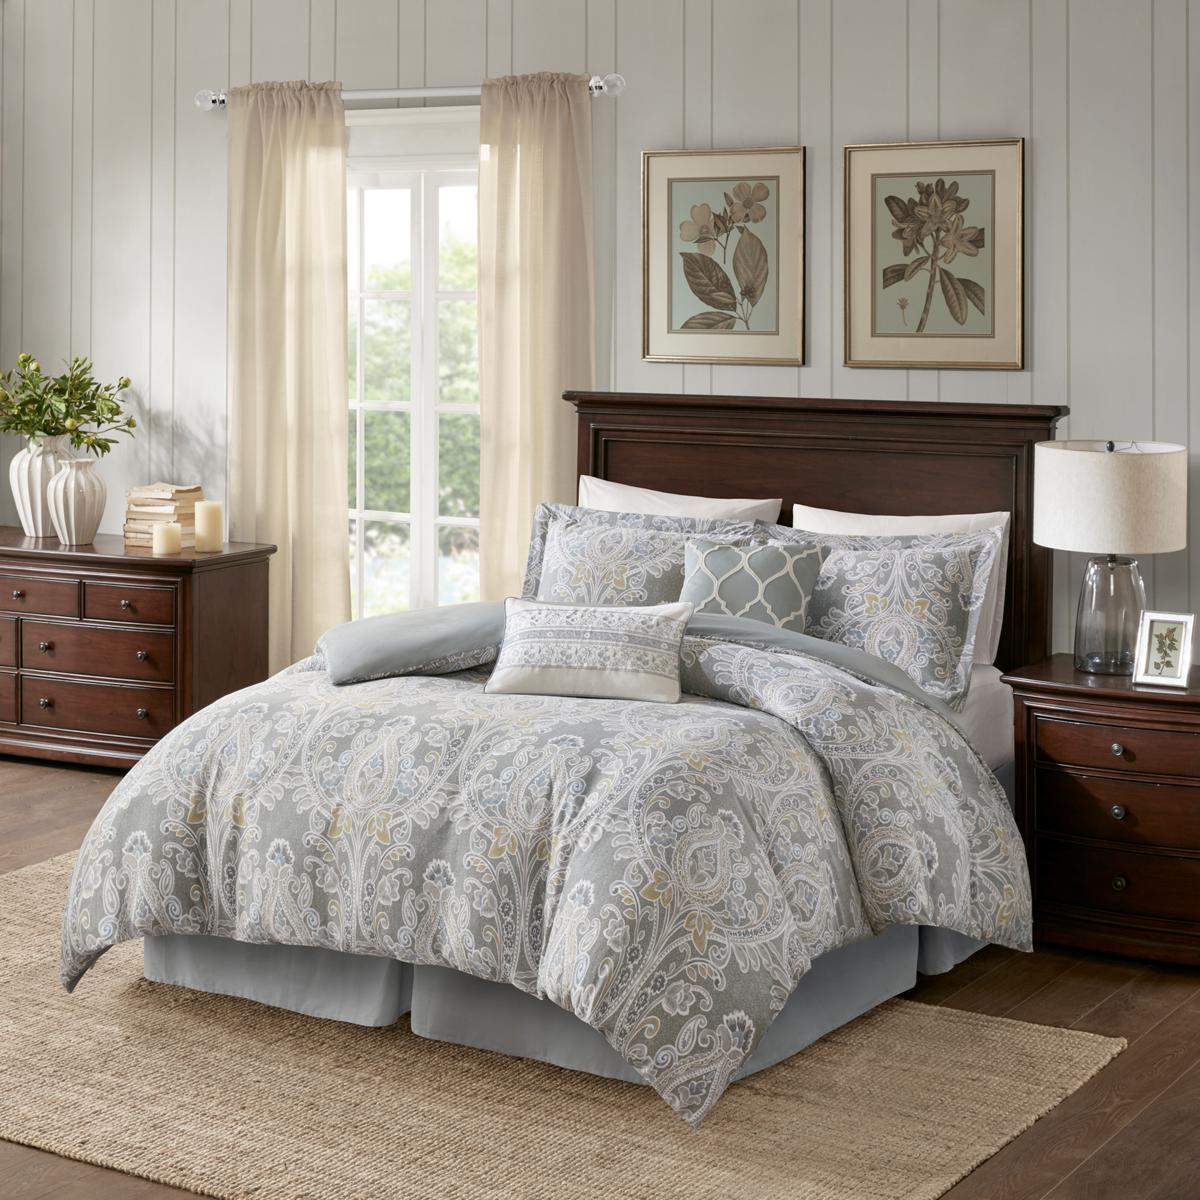 What Is The Best Comforter Size For A King Bed?